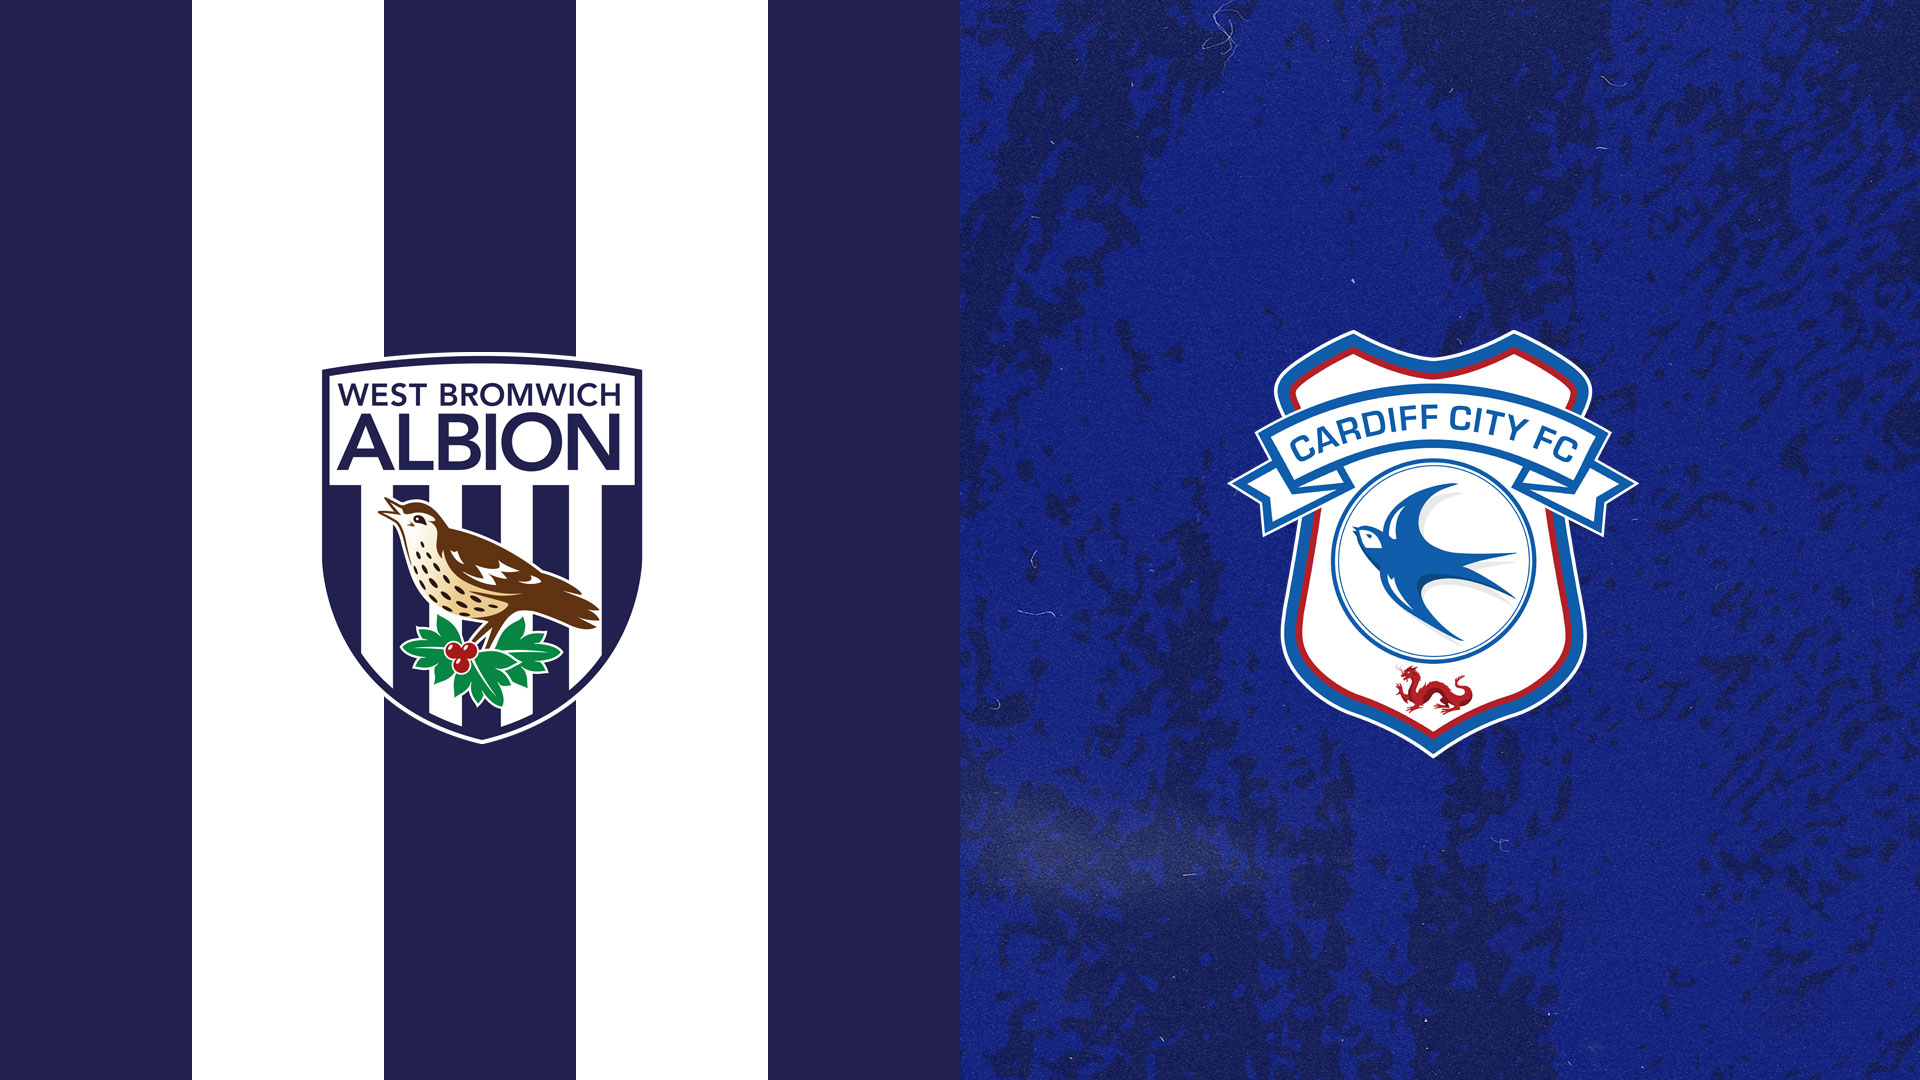 The Bluebirds head to West Bromwich Albion this Wednesday...